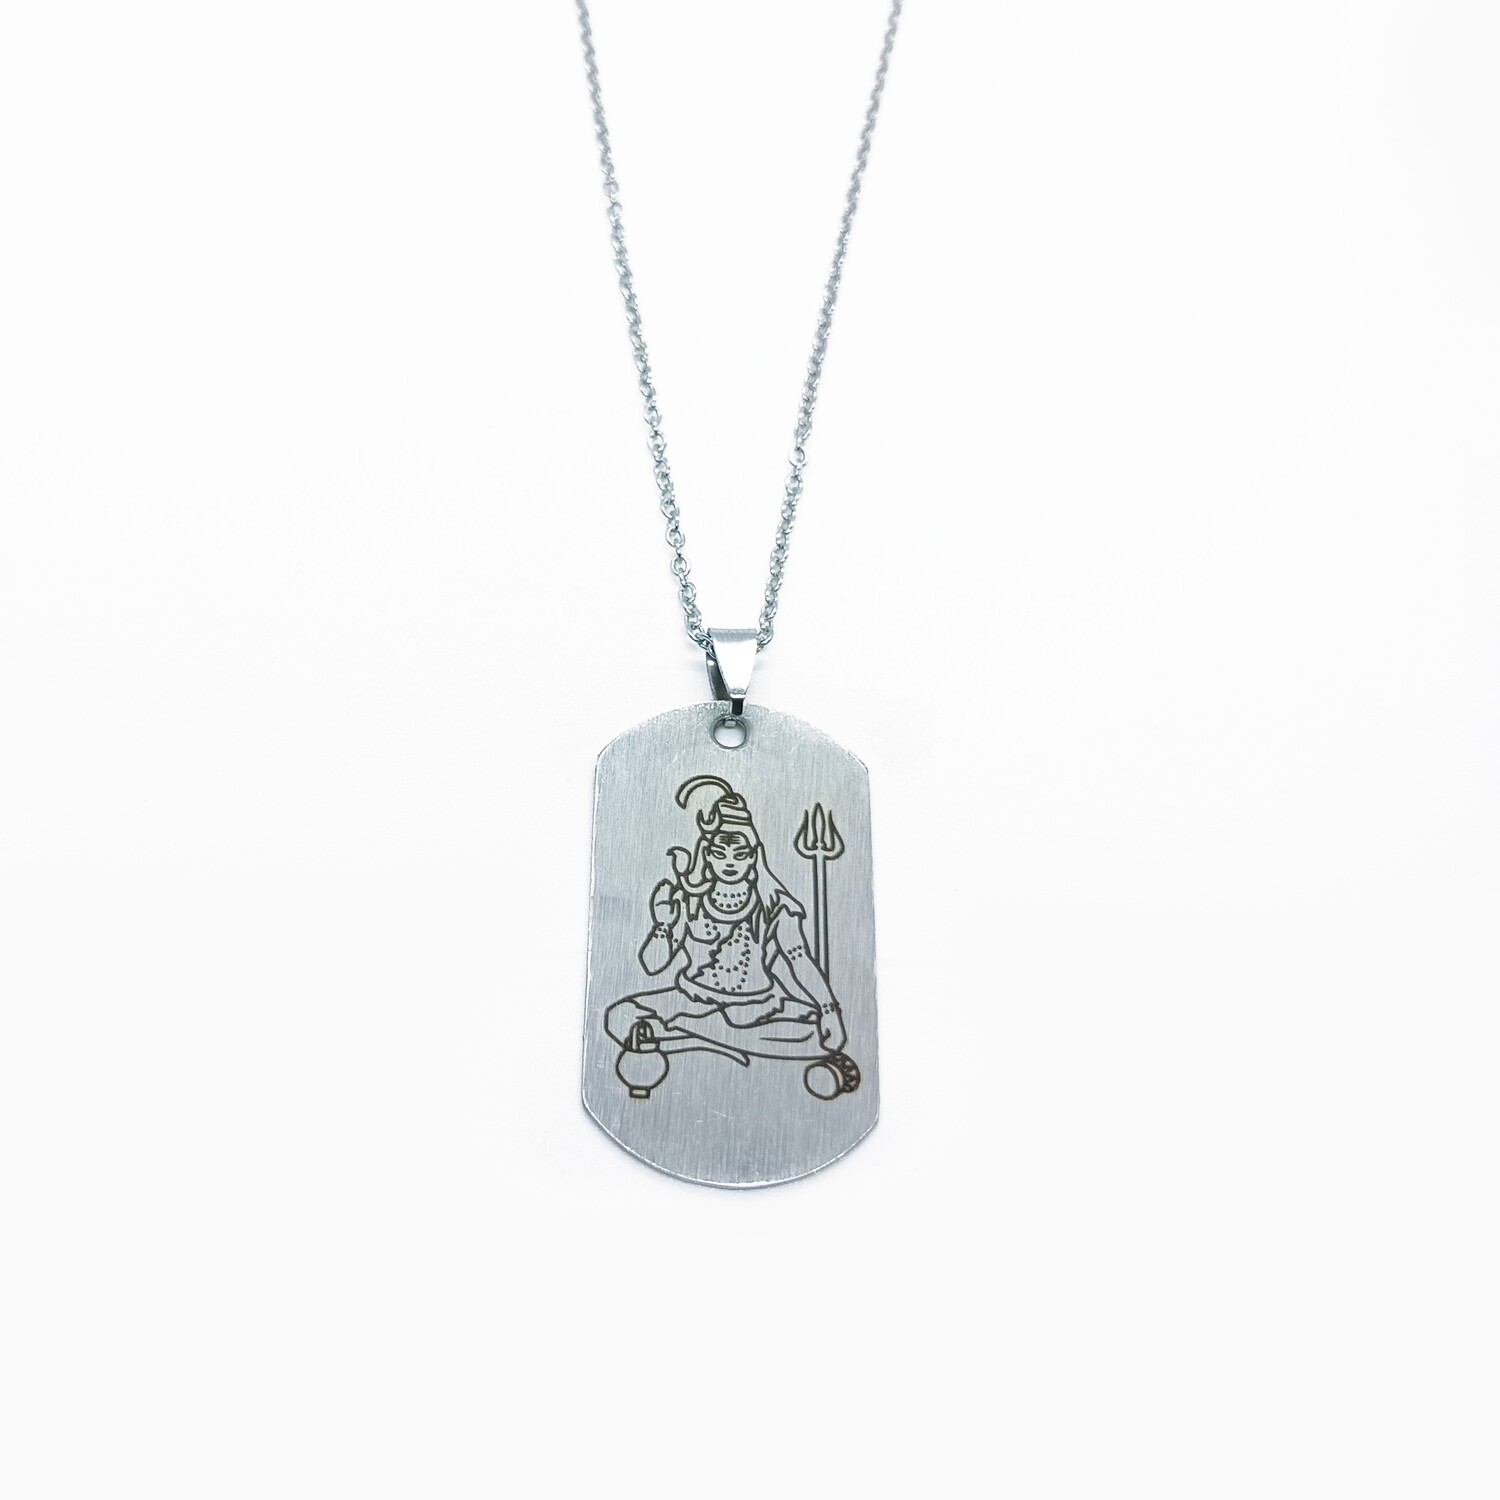 Lord Shiva necklace engraved